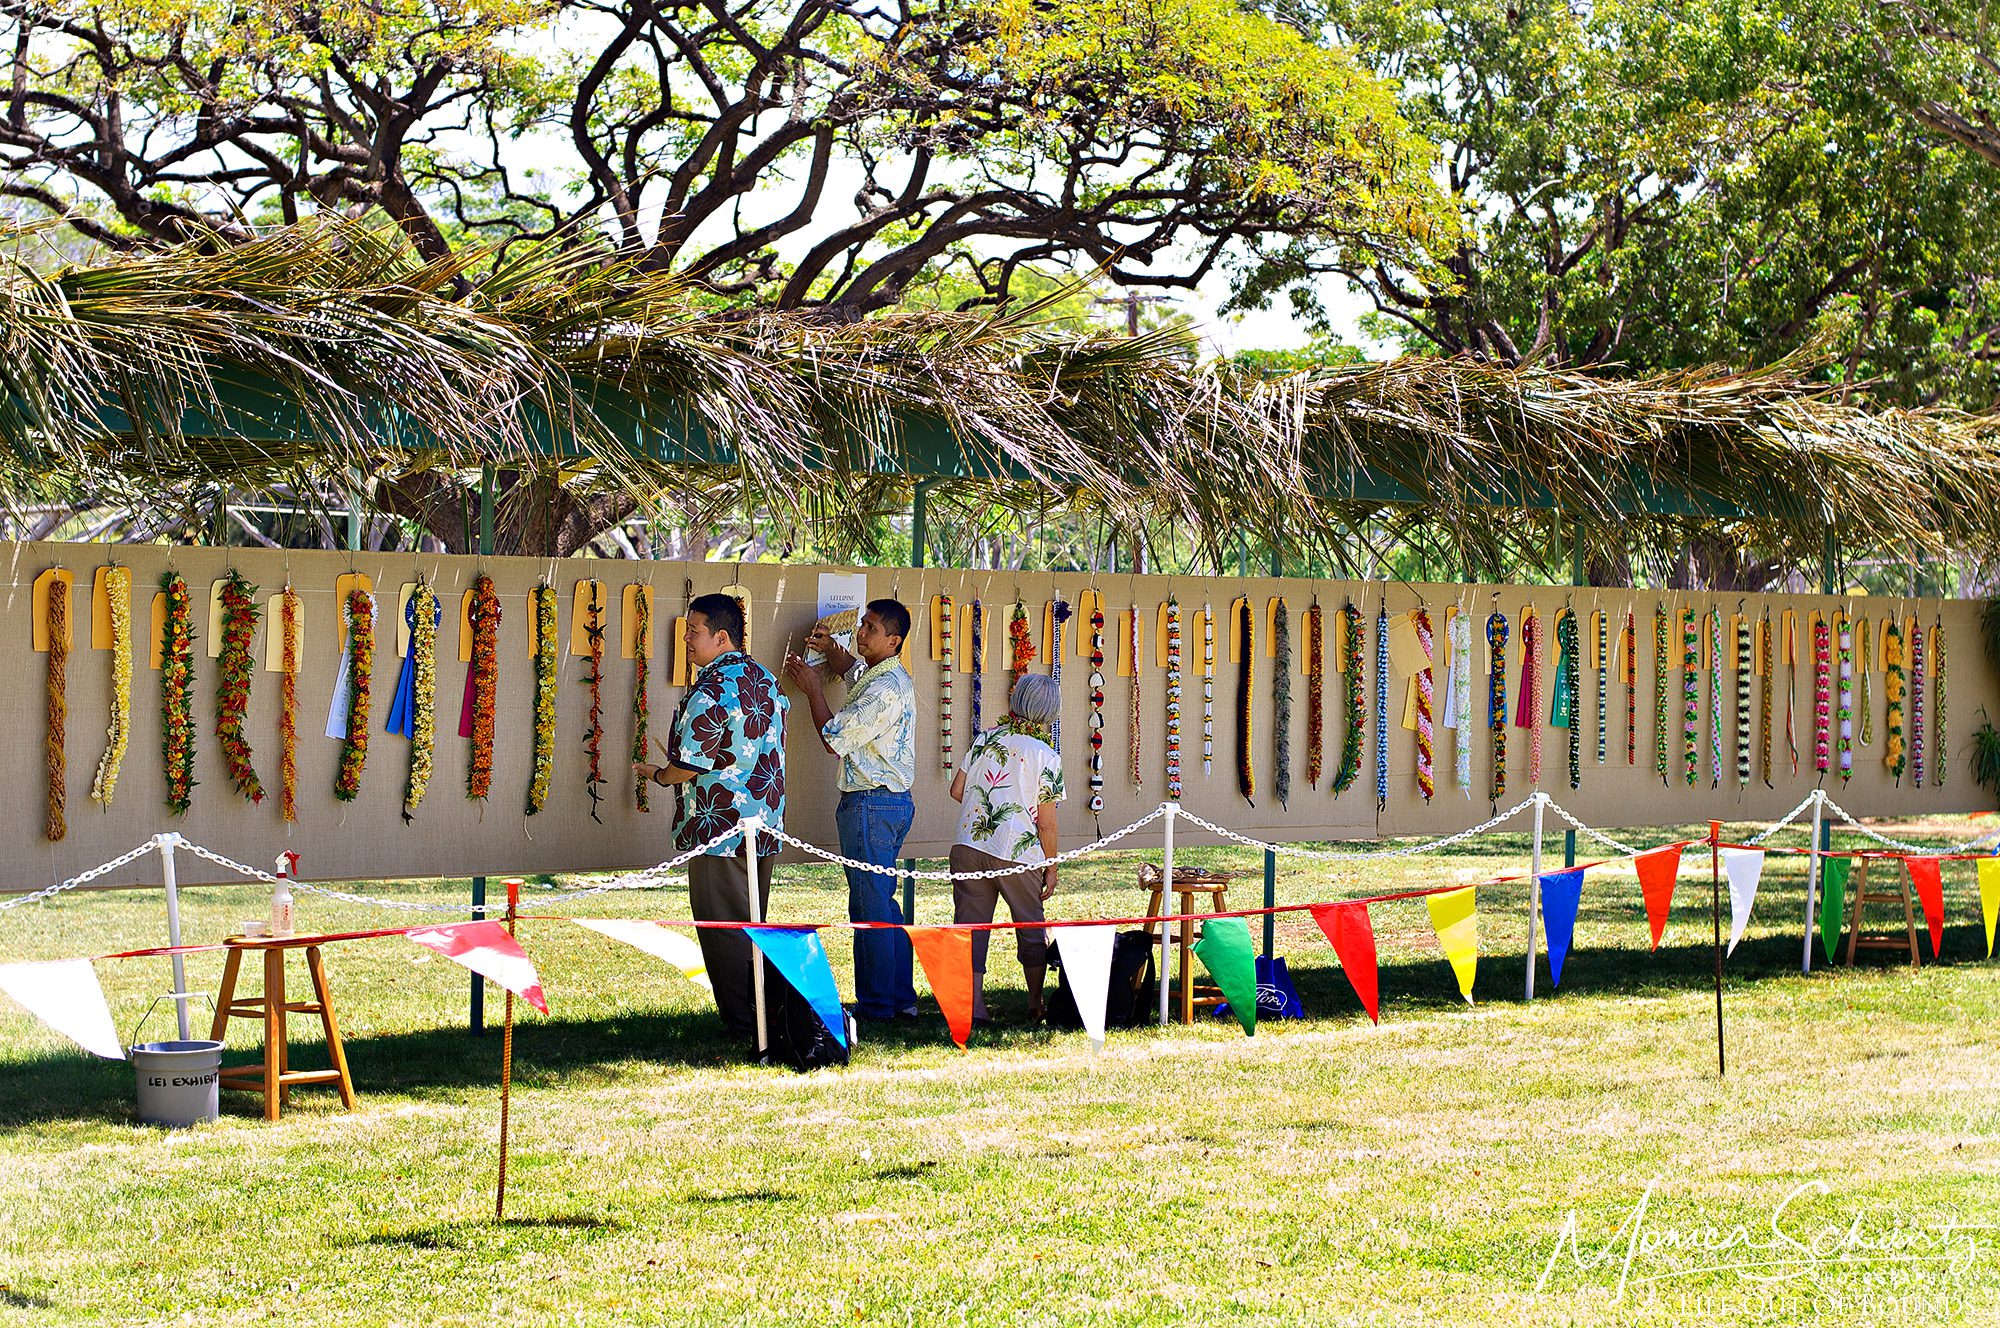 Lei-in-competition-at-Lei-Day-celebrations-in-Honolulu-Hawaii-2013